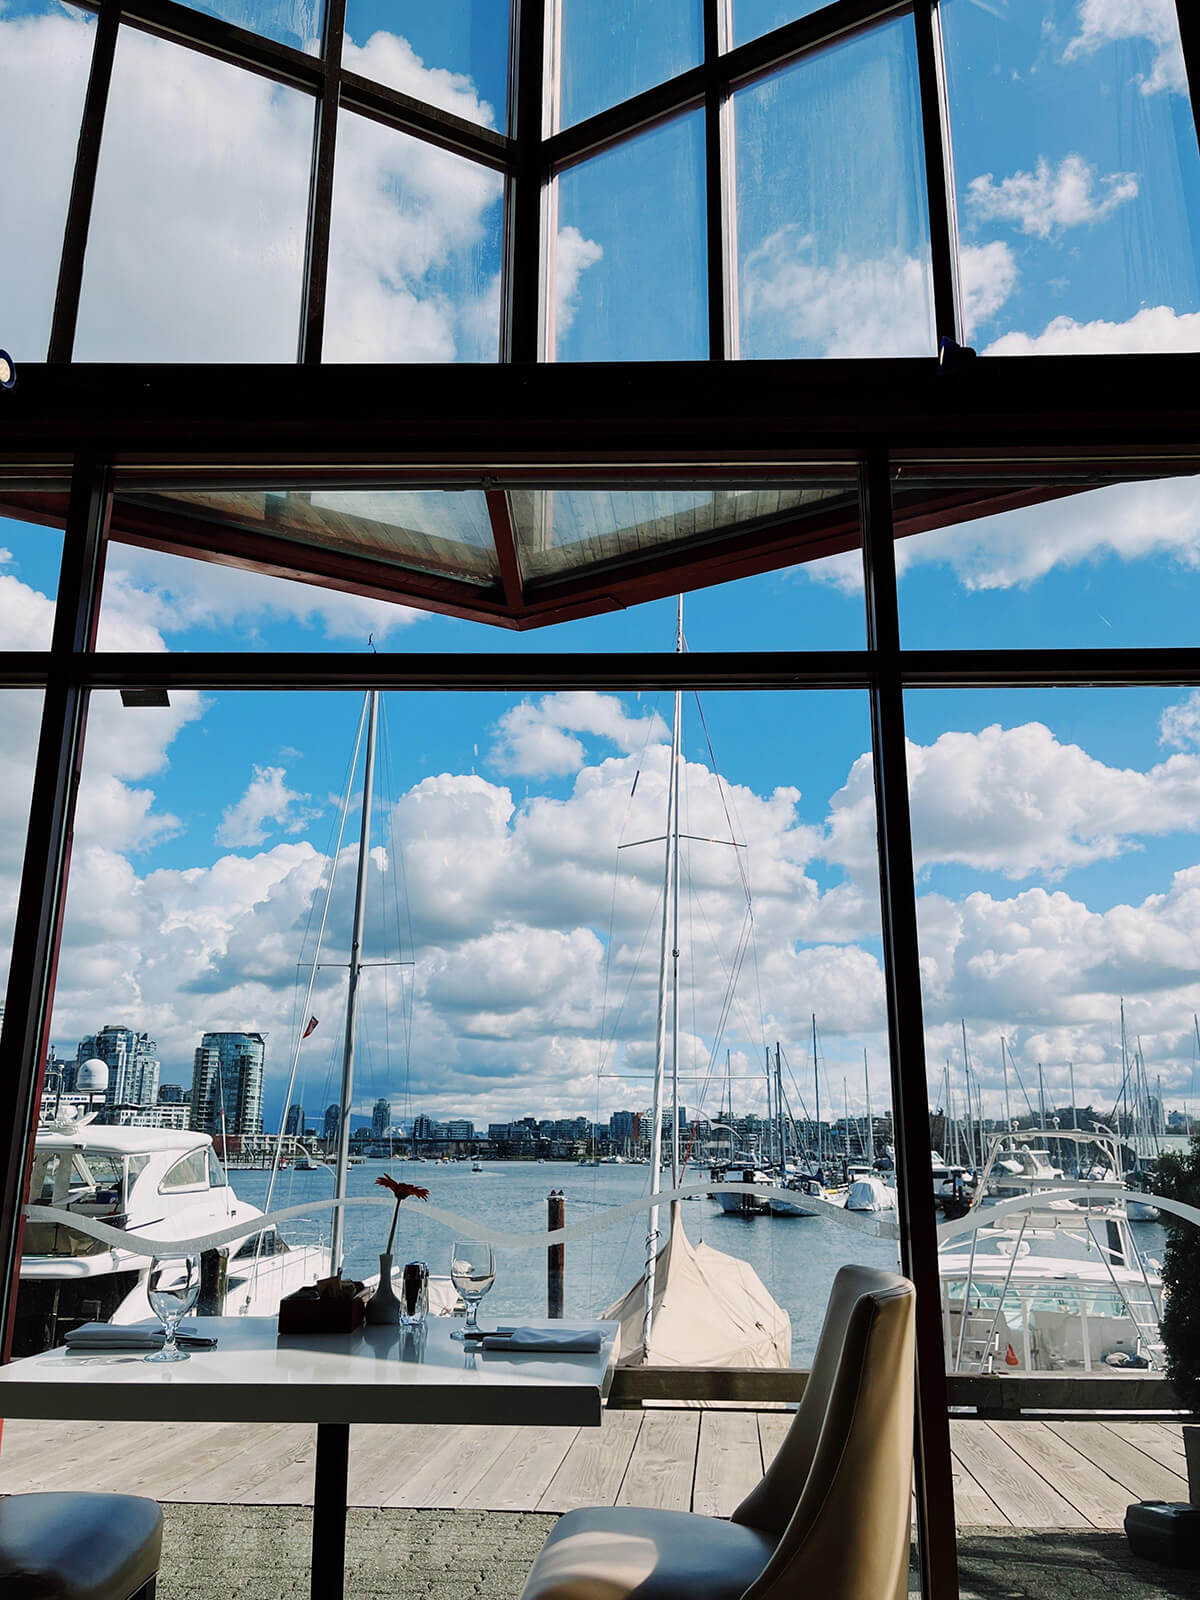 View of boats and a dock outside a restaurant window. There are lots of clouds and a bright blue sky.